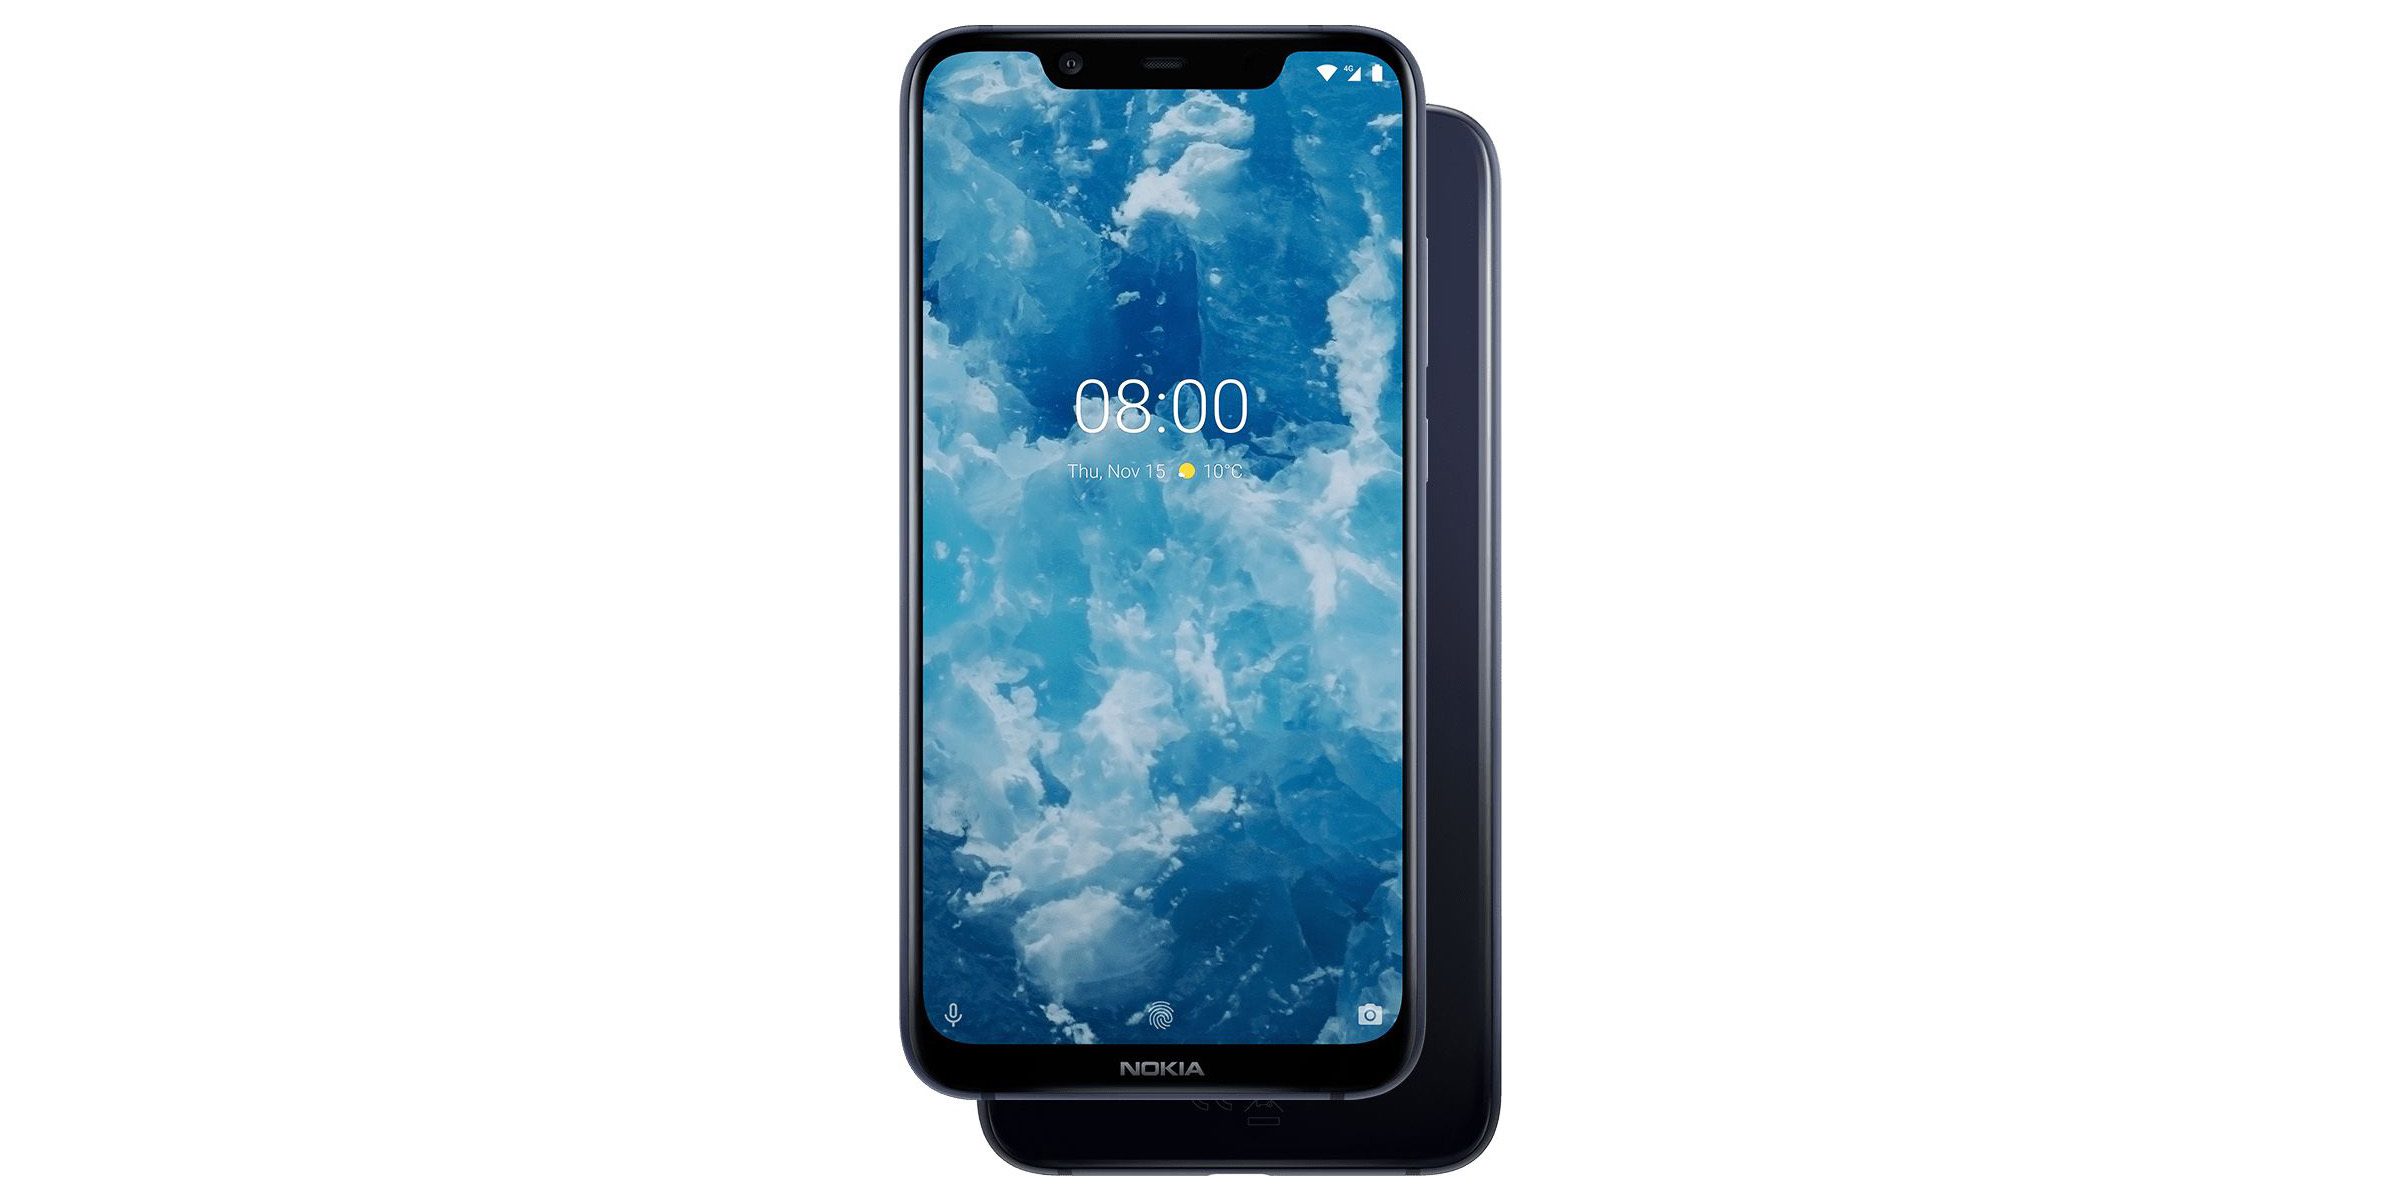 Nokia launches its valuable flagship smartphone 8.1 with 'PureDisplay'